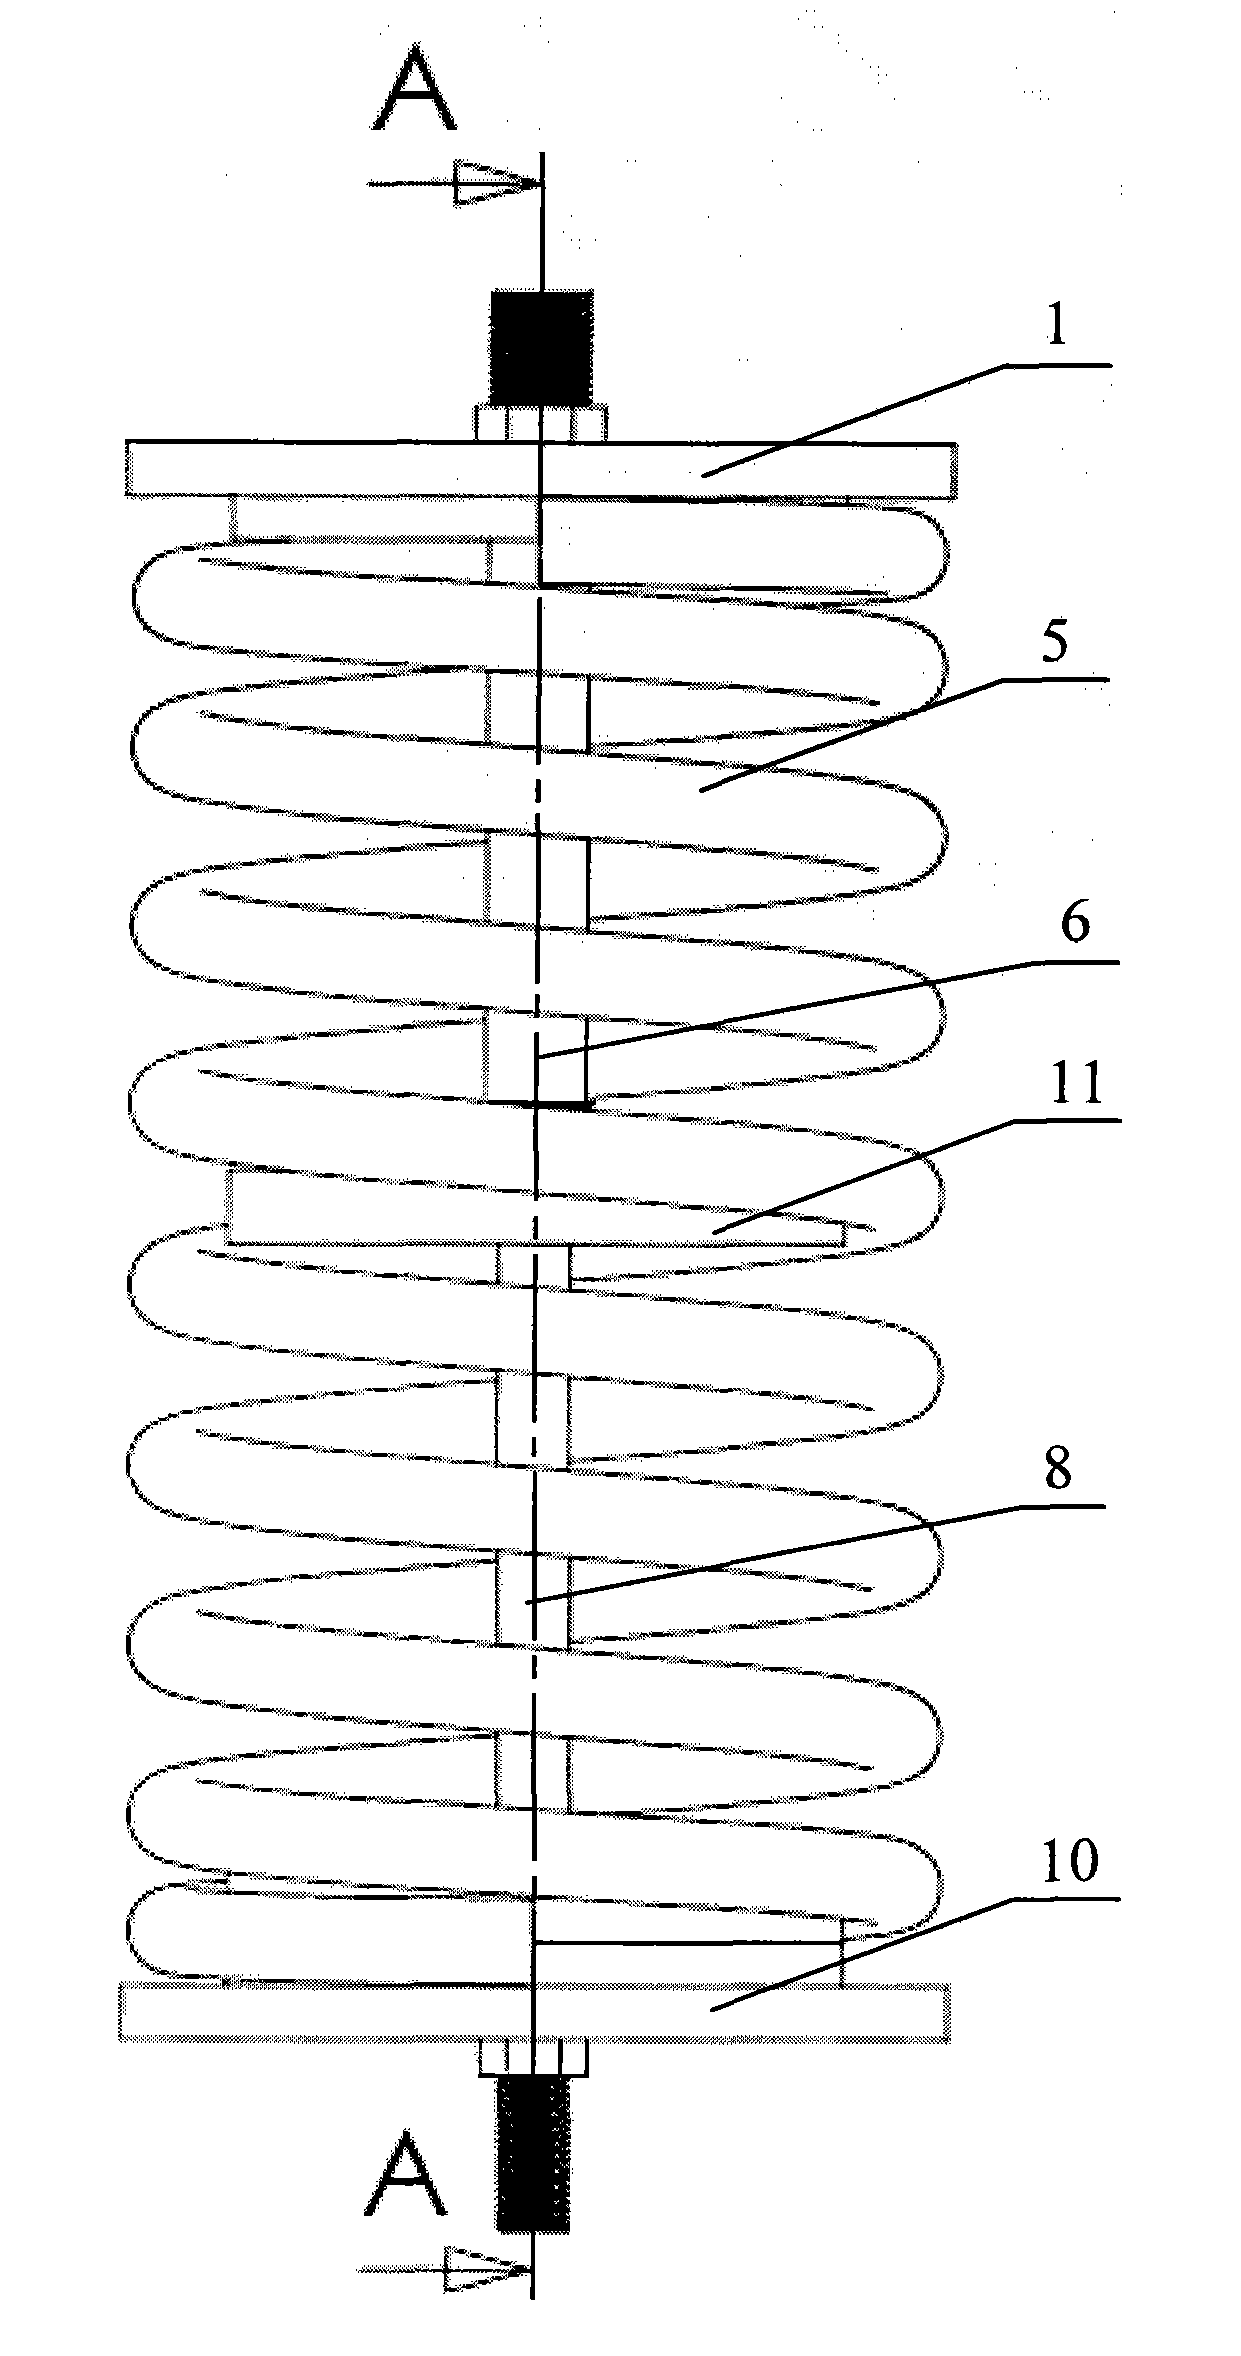 Magnetic rigidity-controlled suspension spring mechanism